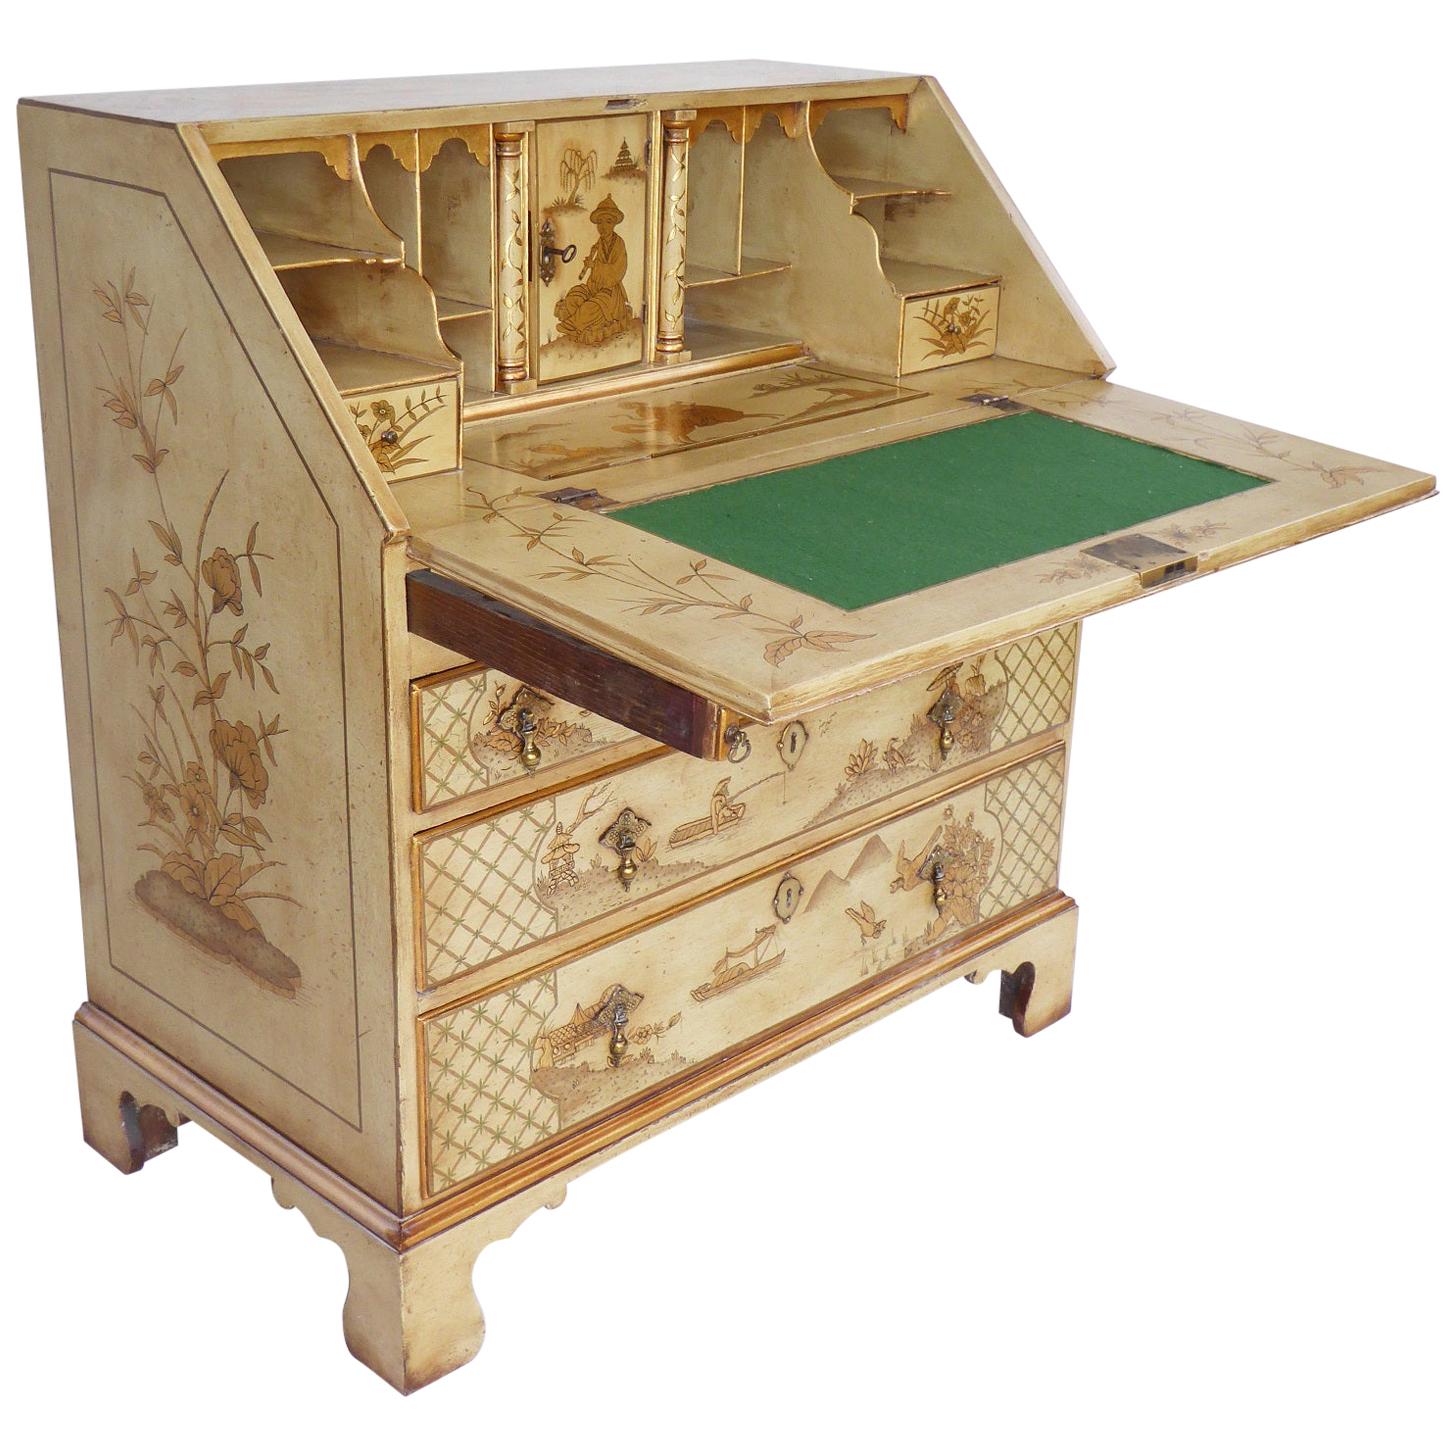 18th Century English George III Lacquer and Gilt Chinoiserie Secretary